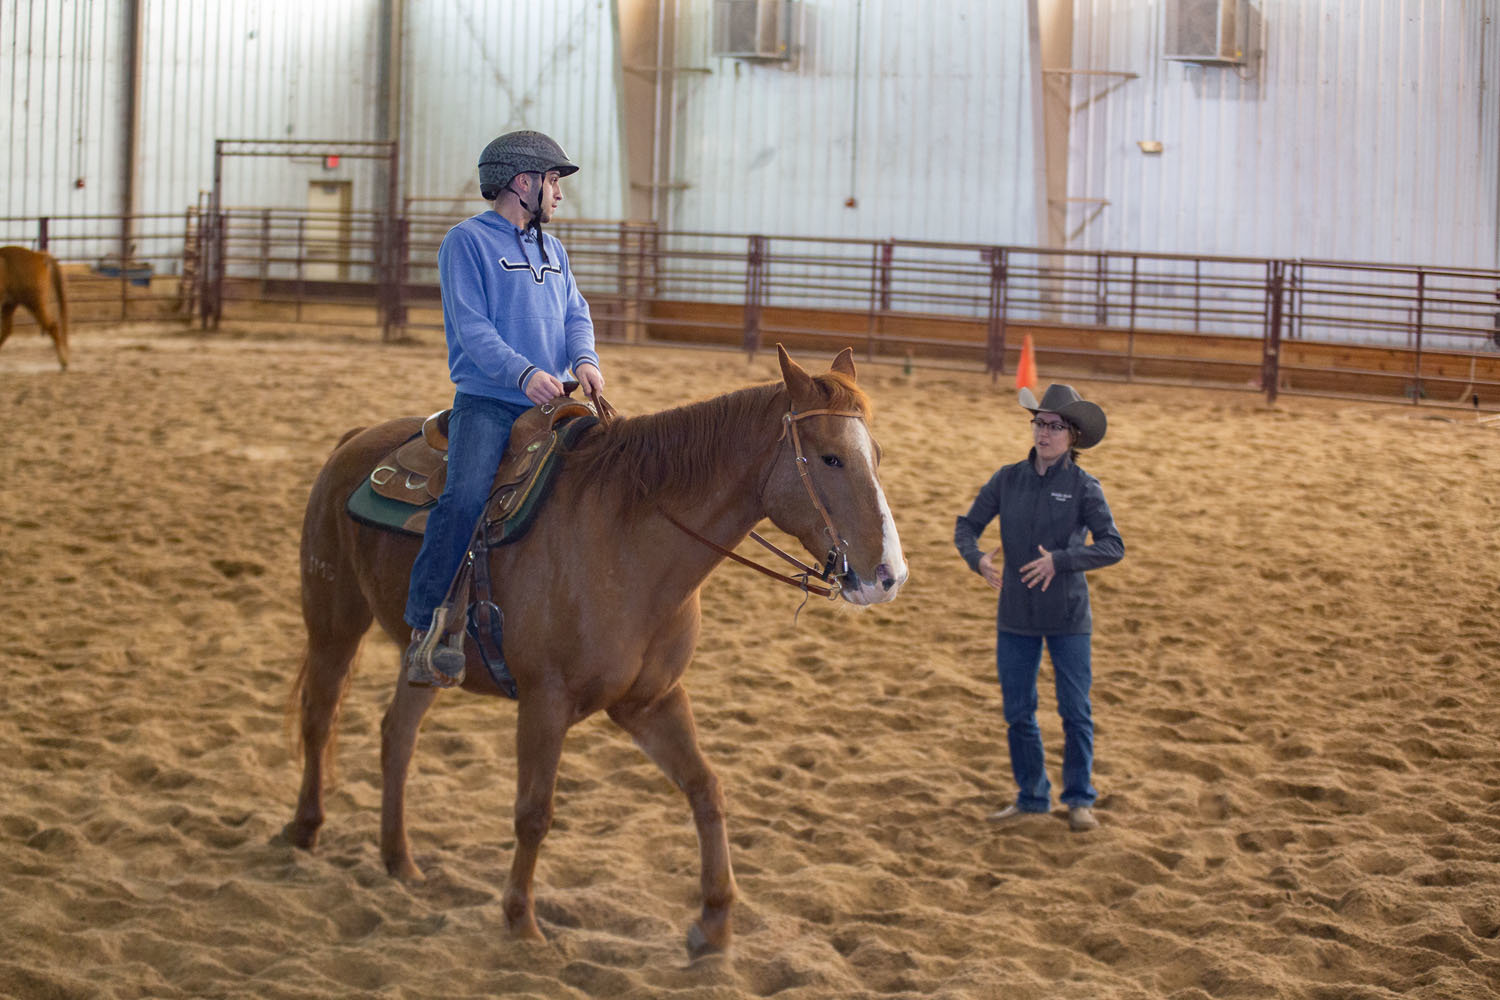 EXPANDING EDUCATION: MSU instructor Natalie Mook teaches a horseback riding class at the Darr Agricultural Center, which will soon have expanded animal education.